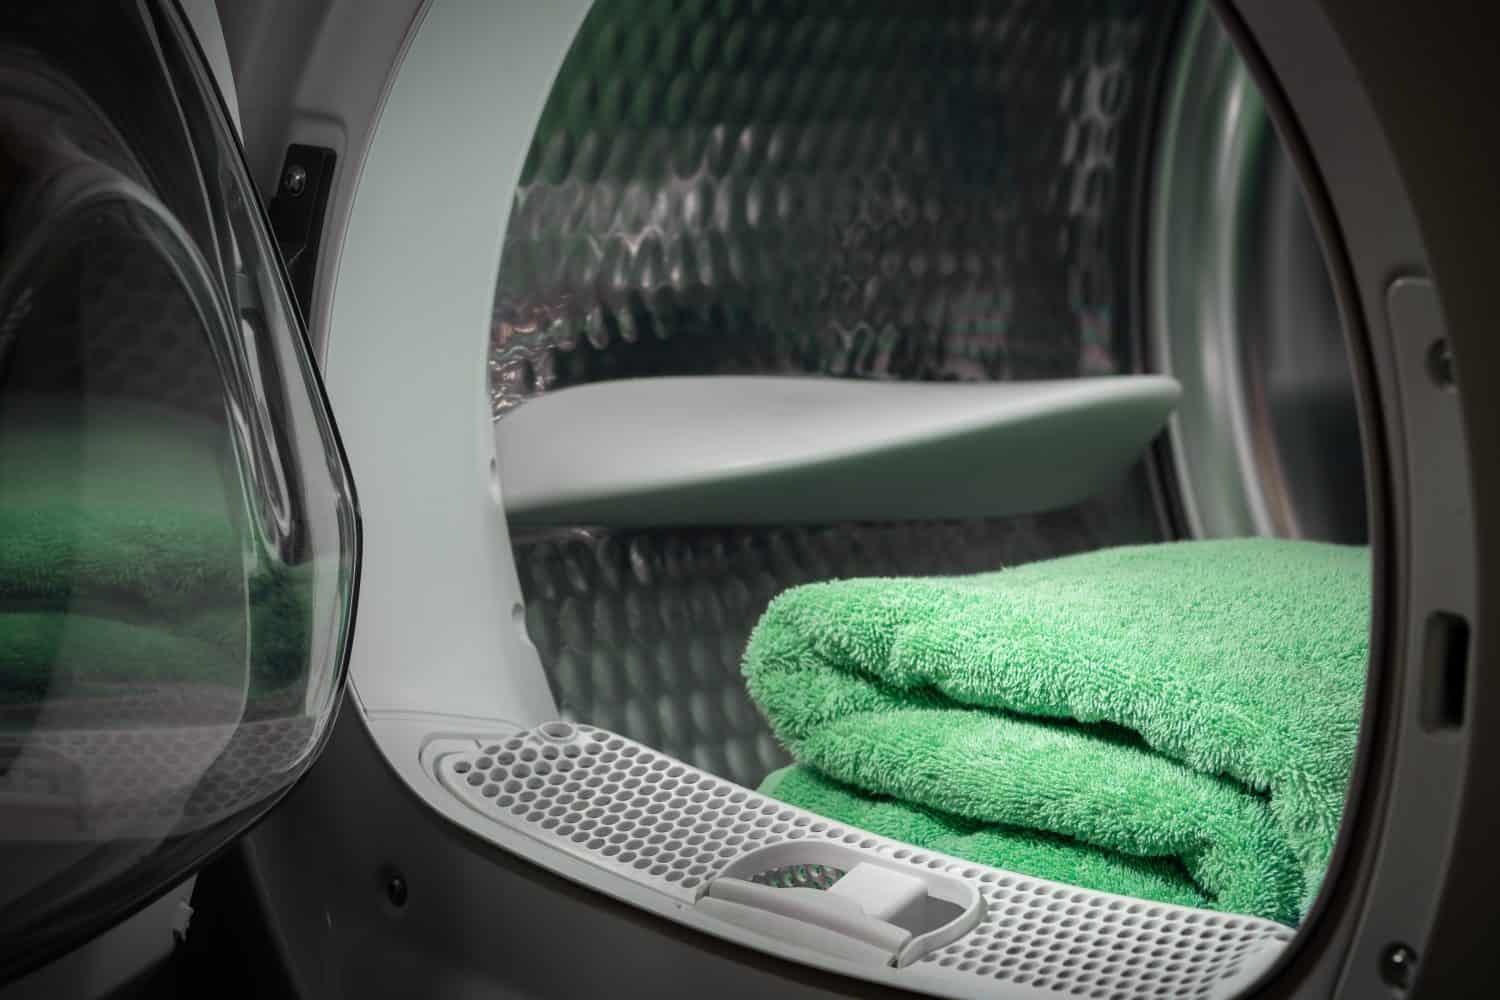 View of the tumble dryer or washing machine with the door open and a green towel inside